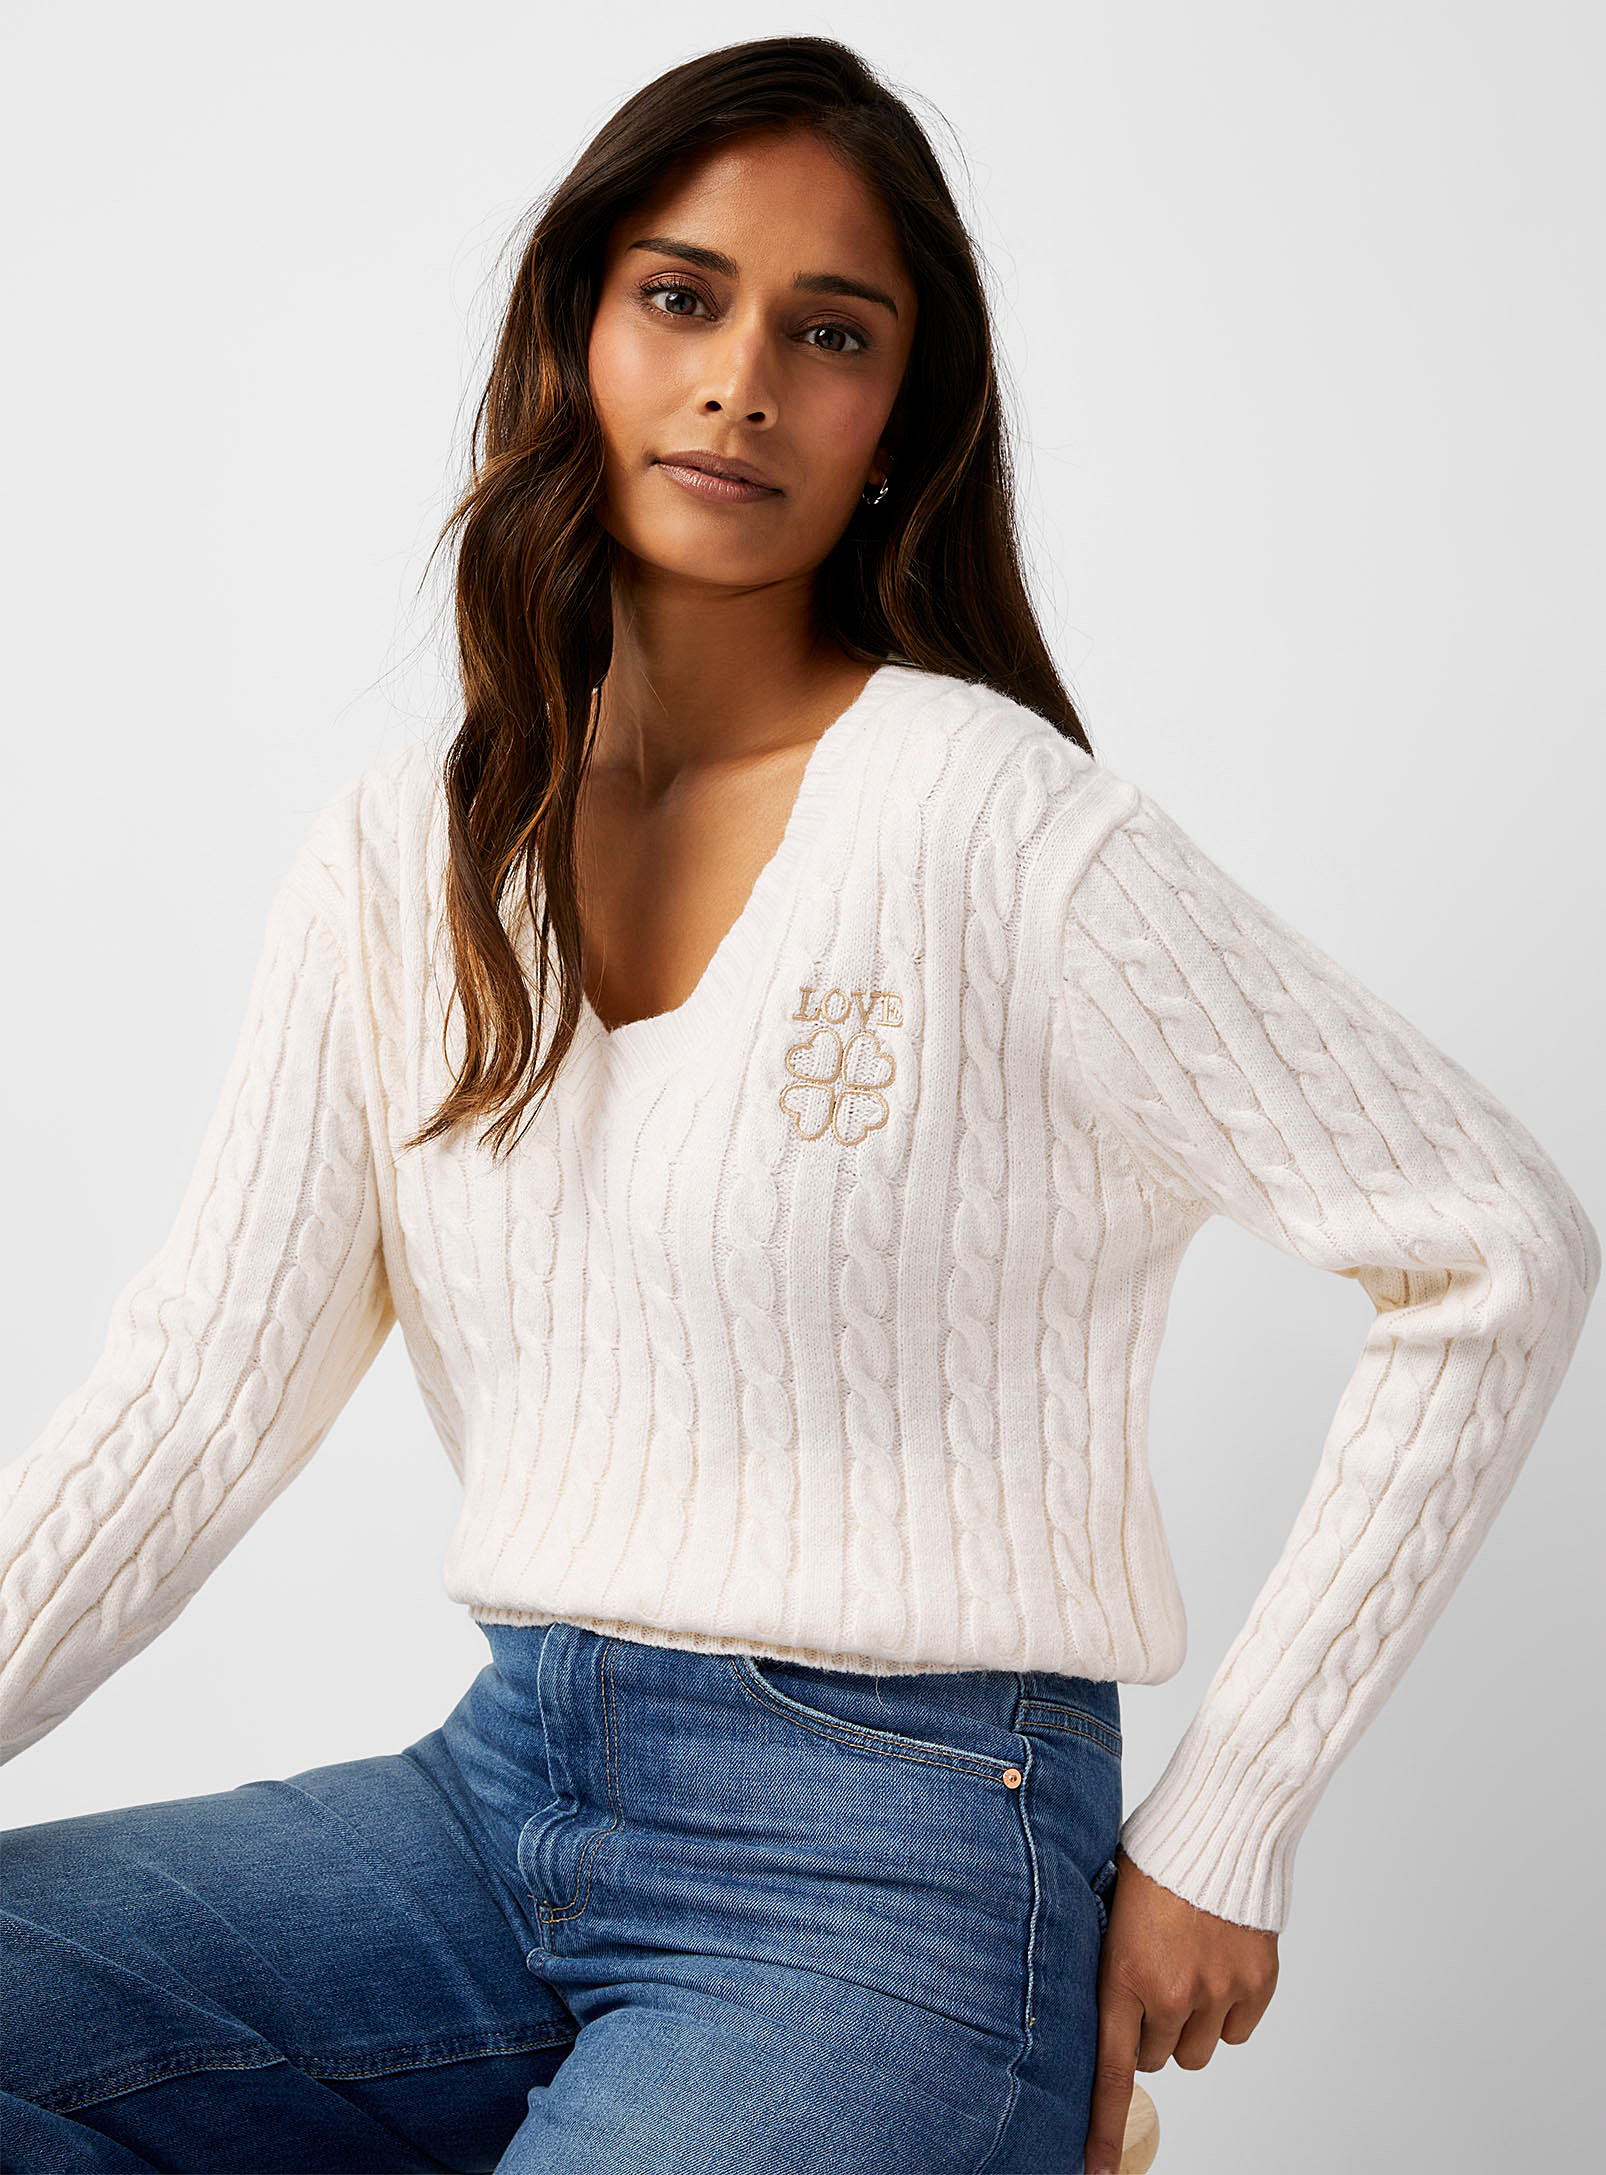 Contemporaine - Women's Romantic embroidery twisted sweater